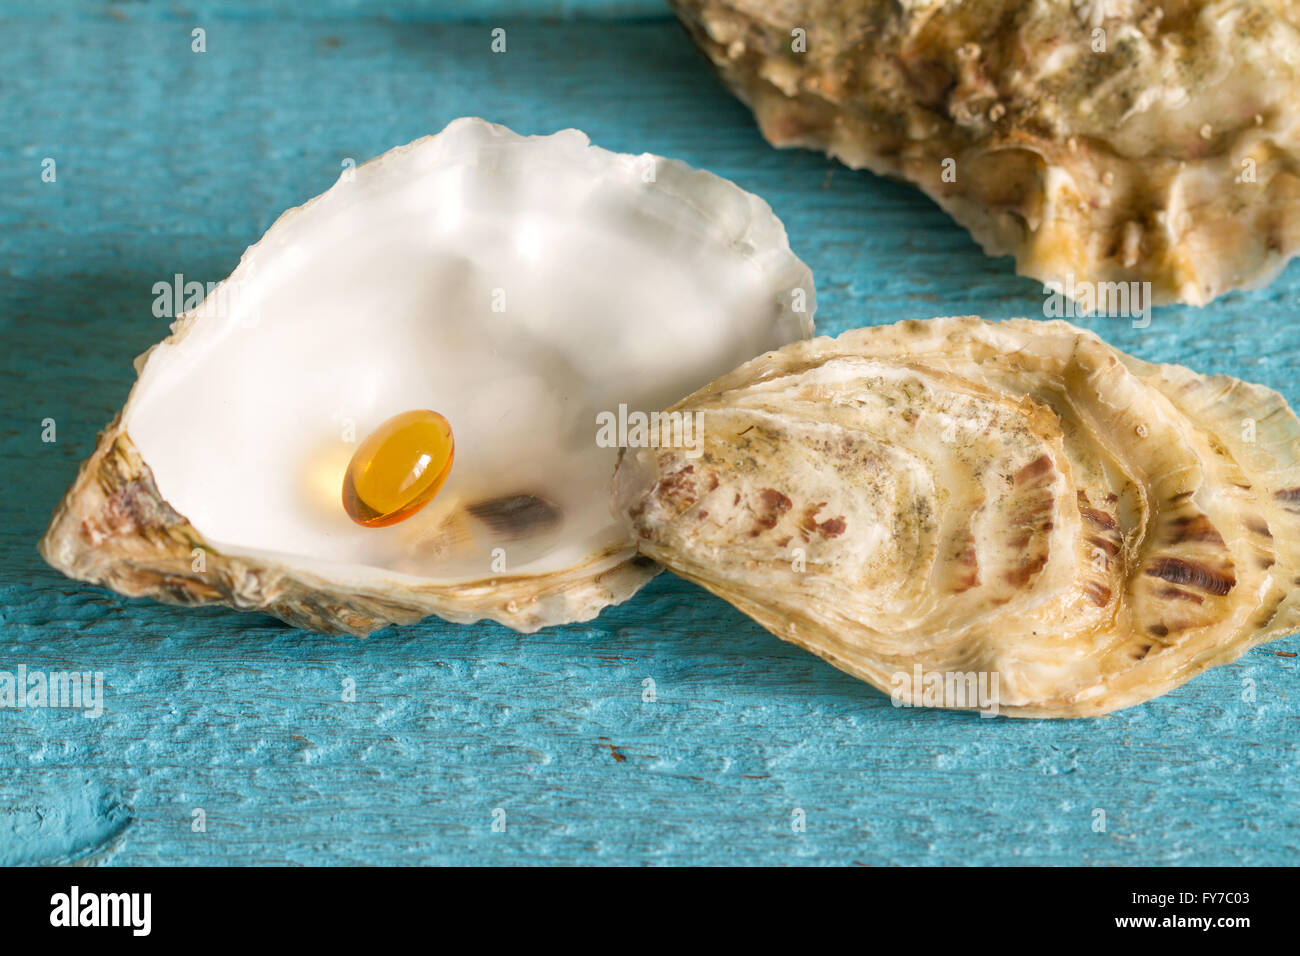 Omega 3 pill in oyster like pearl diet concept Stock Photo